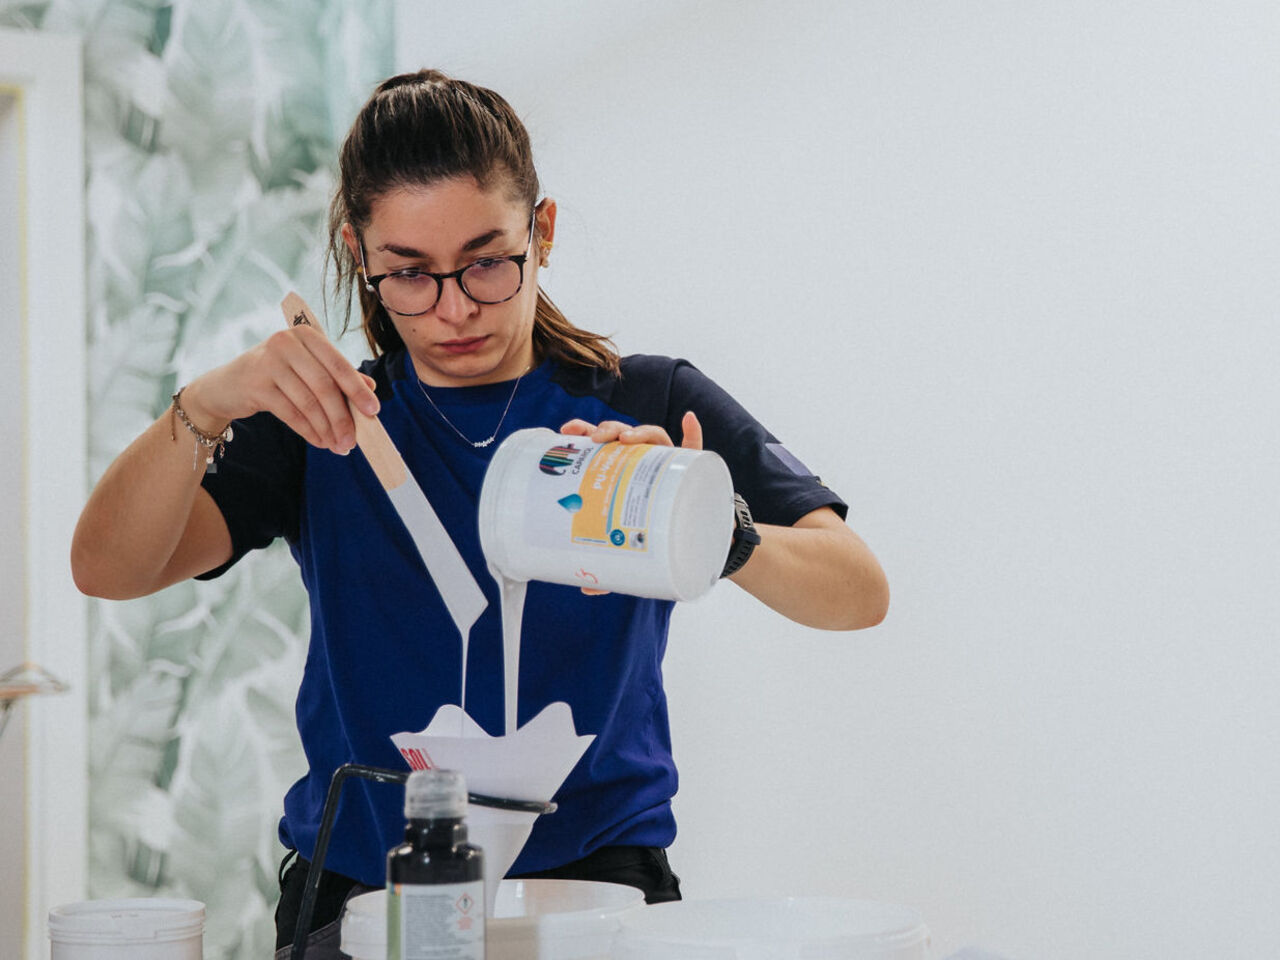 Young painters and tilers compete in South Tyrol, Italy